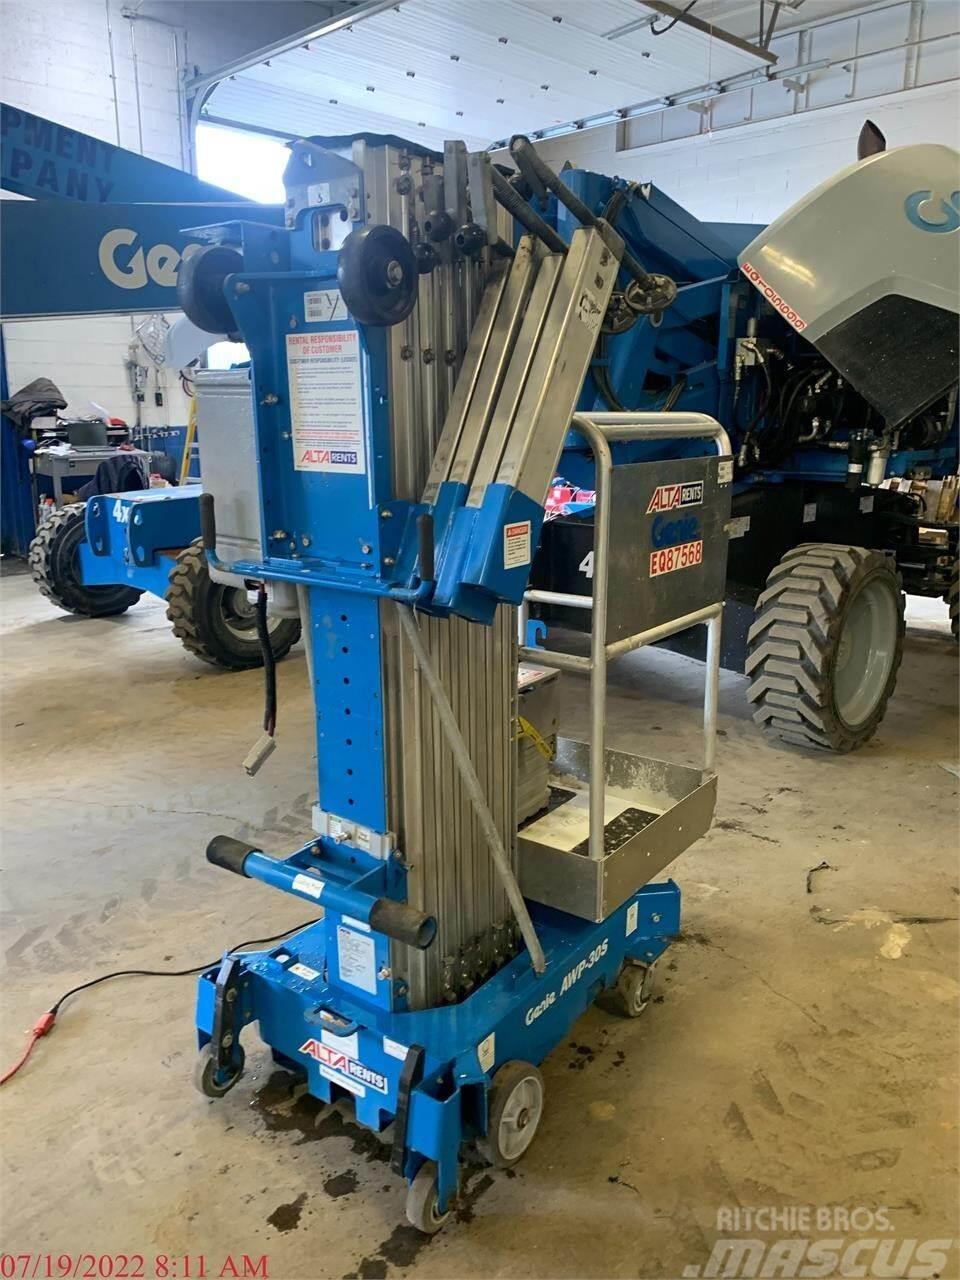 Genie AWP30S Used Personnel lifts and access elevators